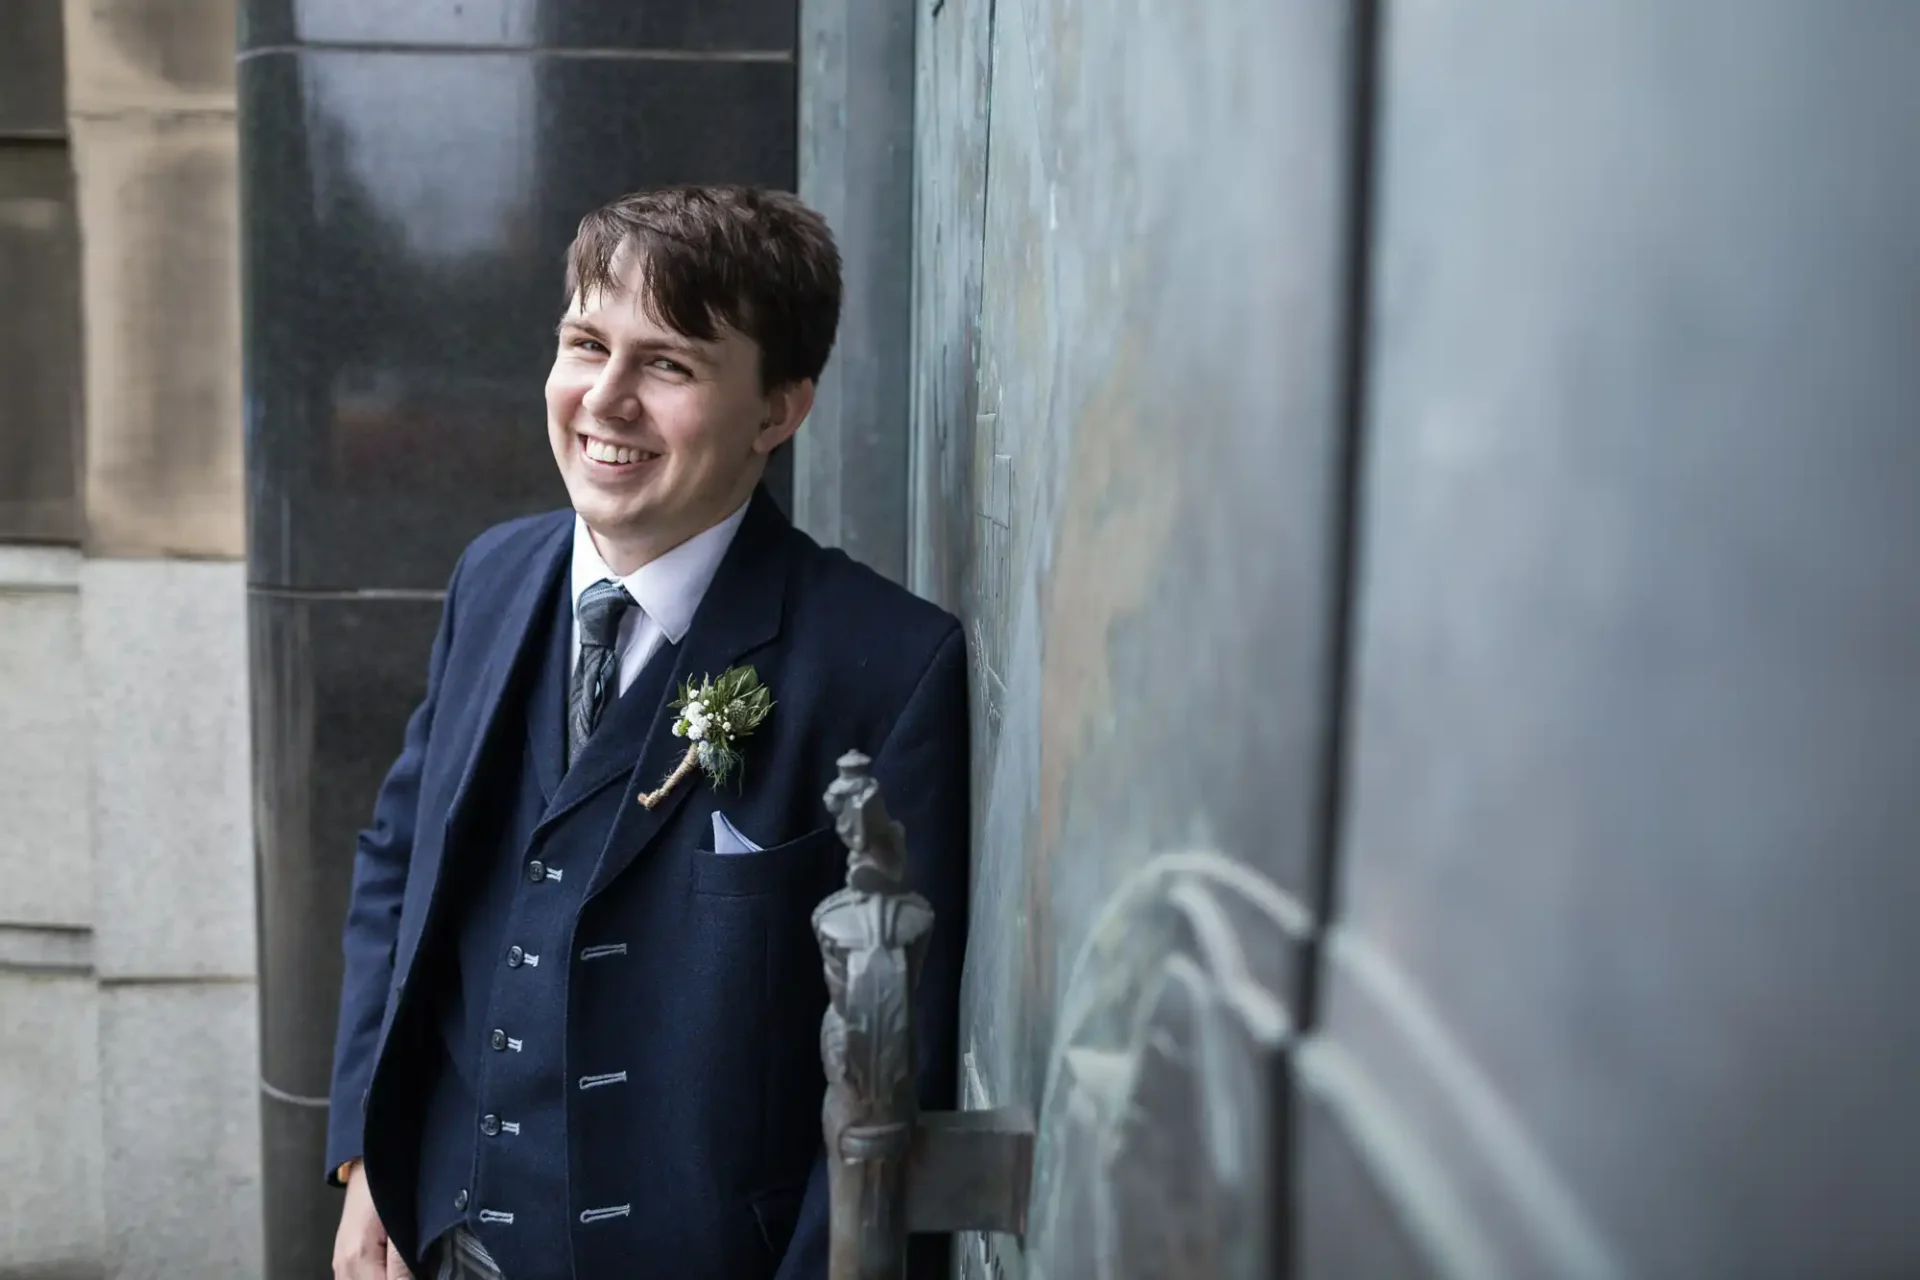 Young man in a dark suit smiling beside an ornate metal doorway, with a flower boutonniere on his lapel.